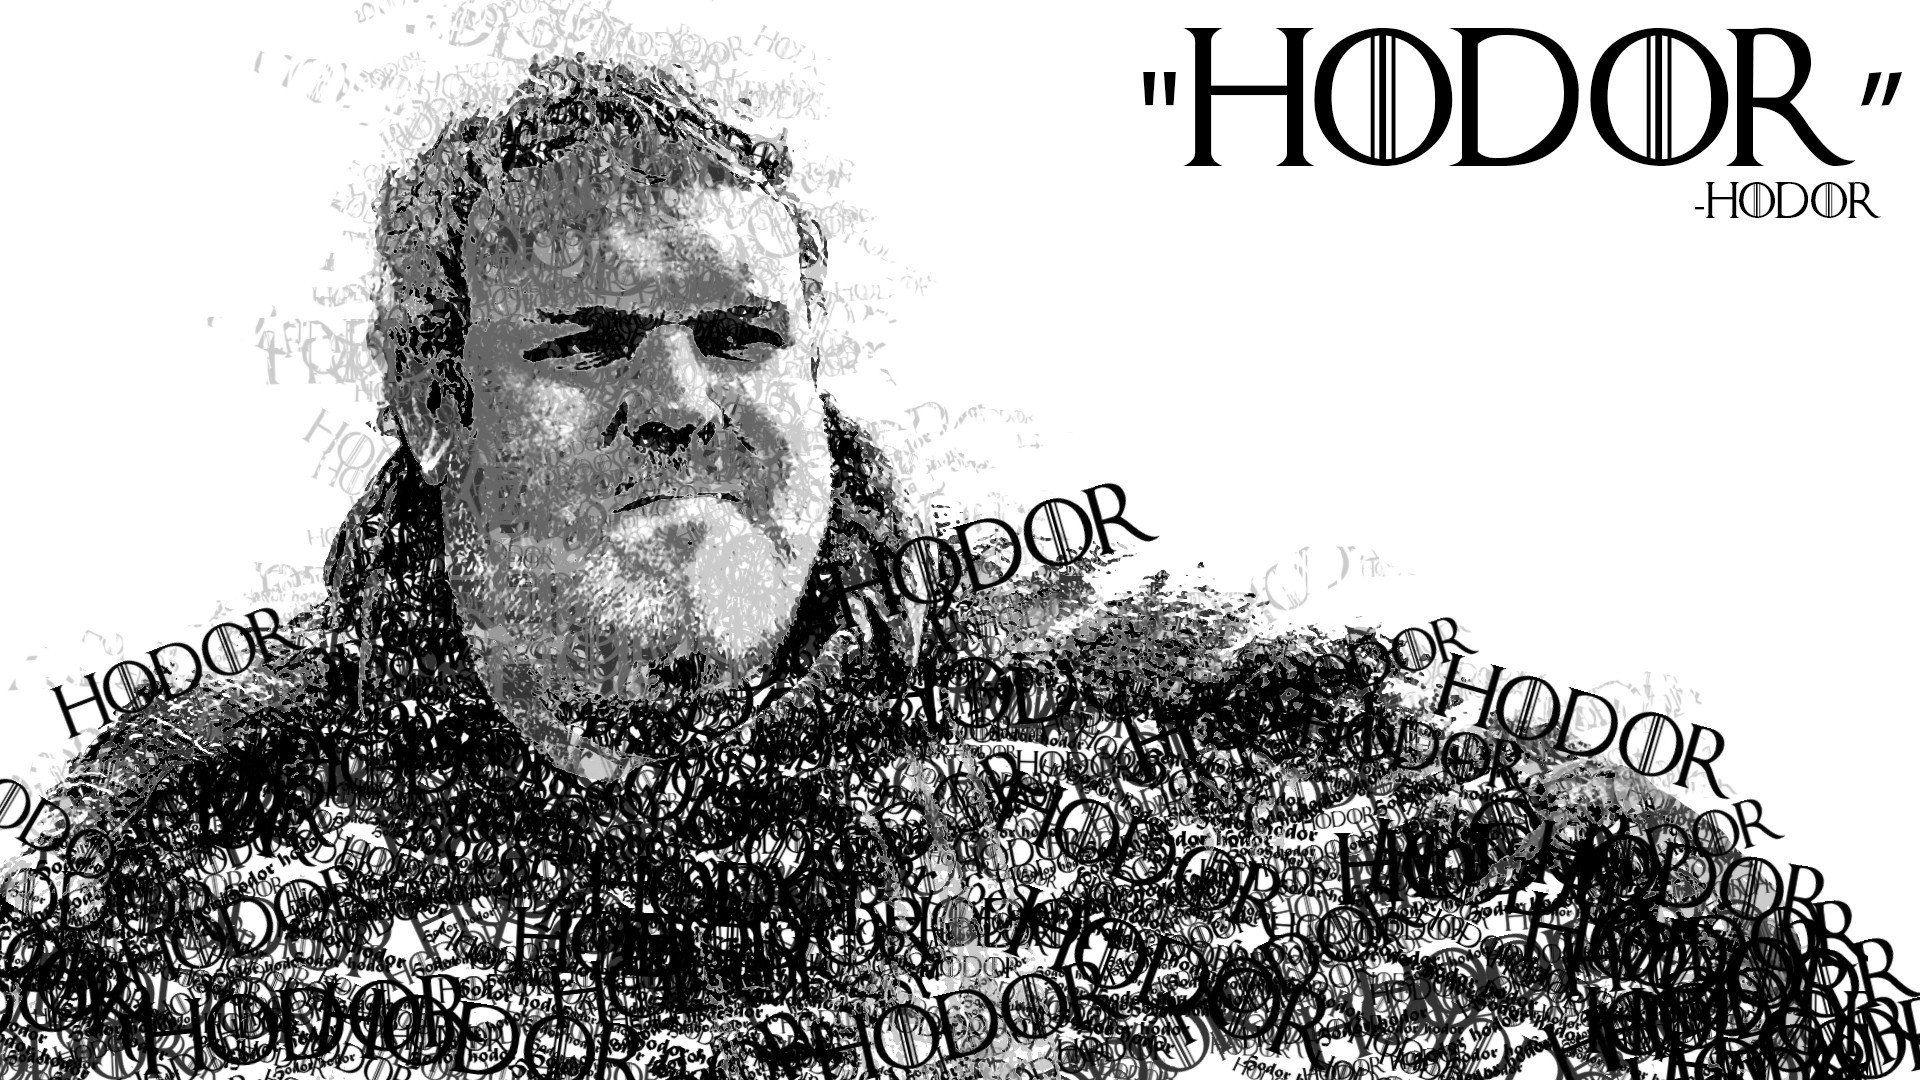 Game Of Thrones Quotes